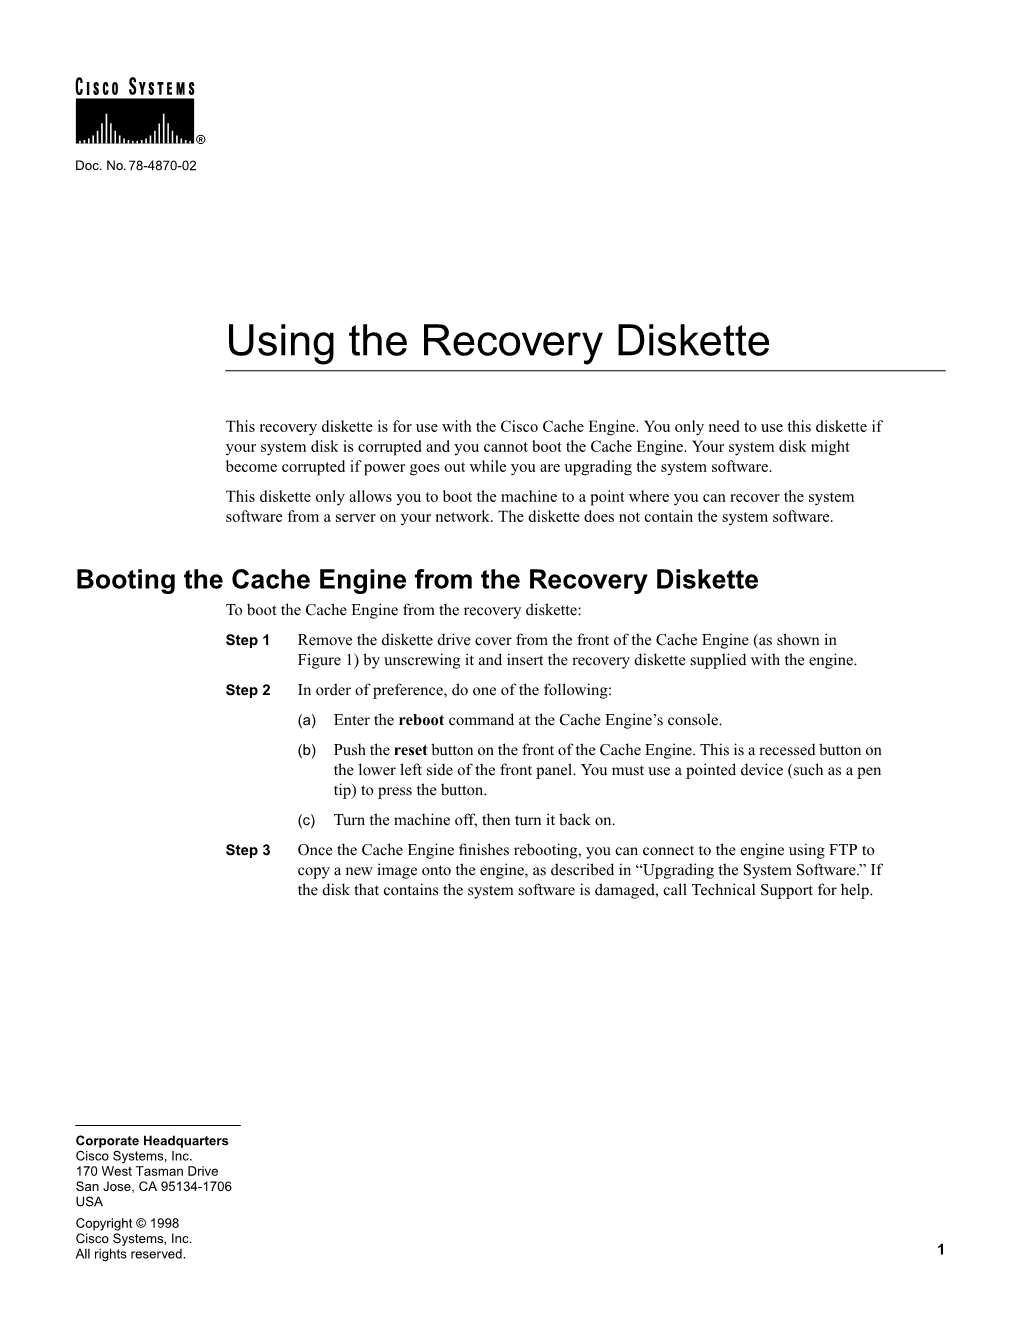 Using the Recovery Diskette